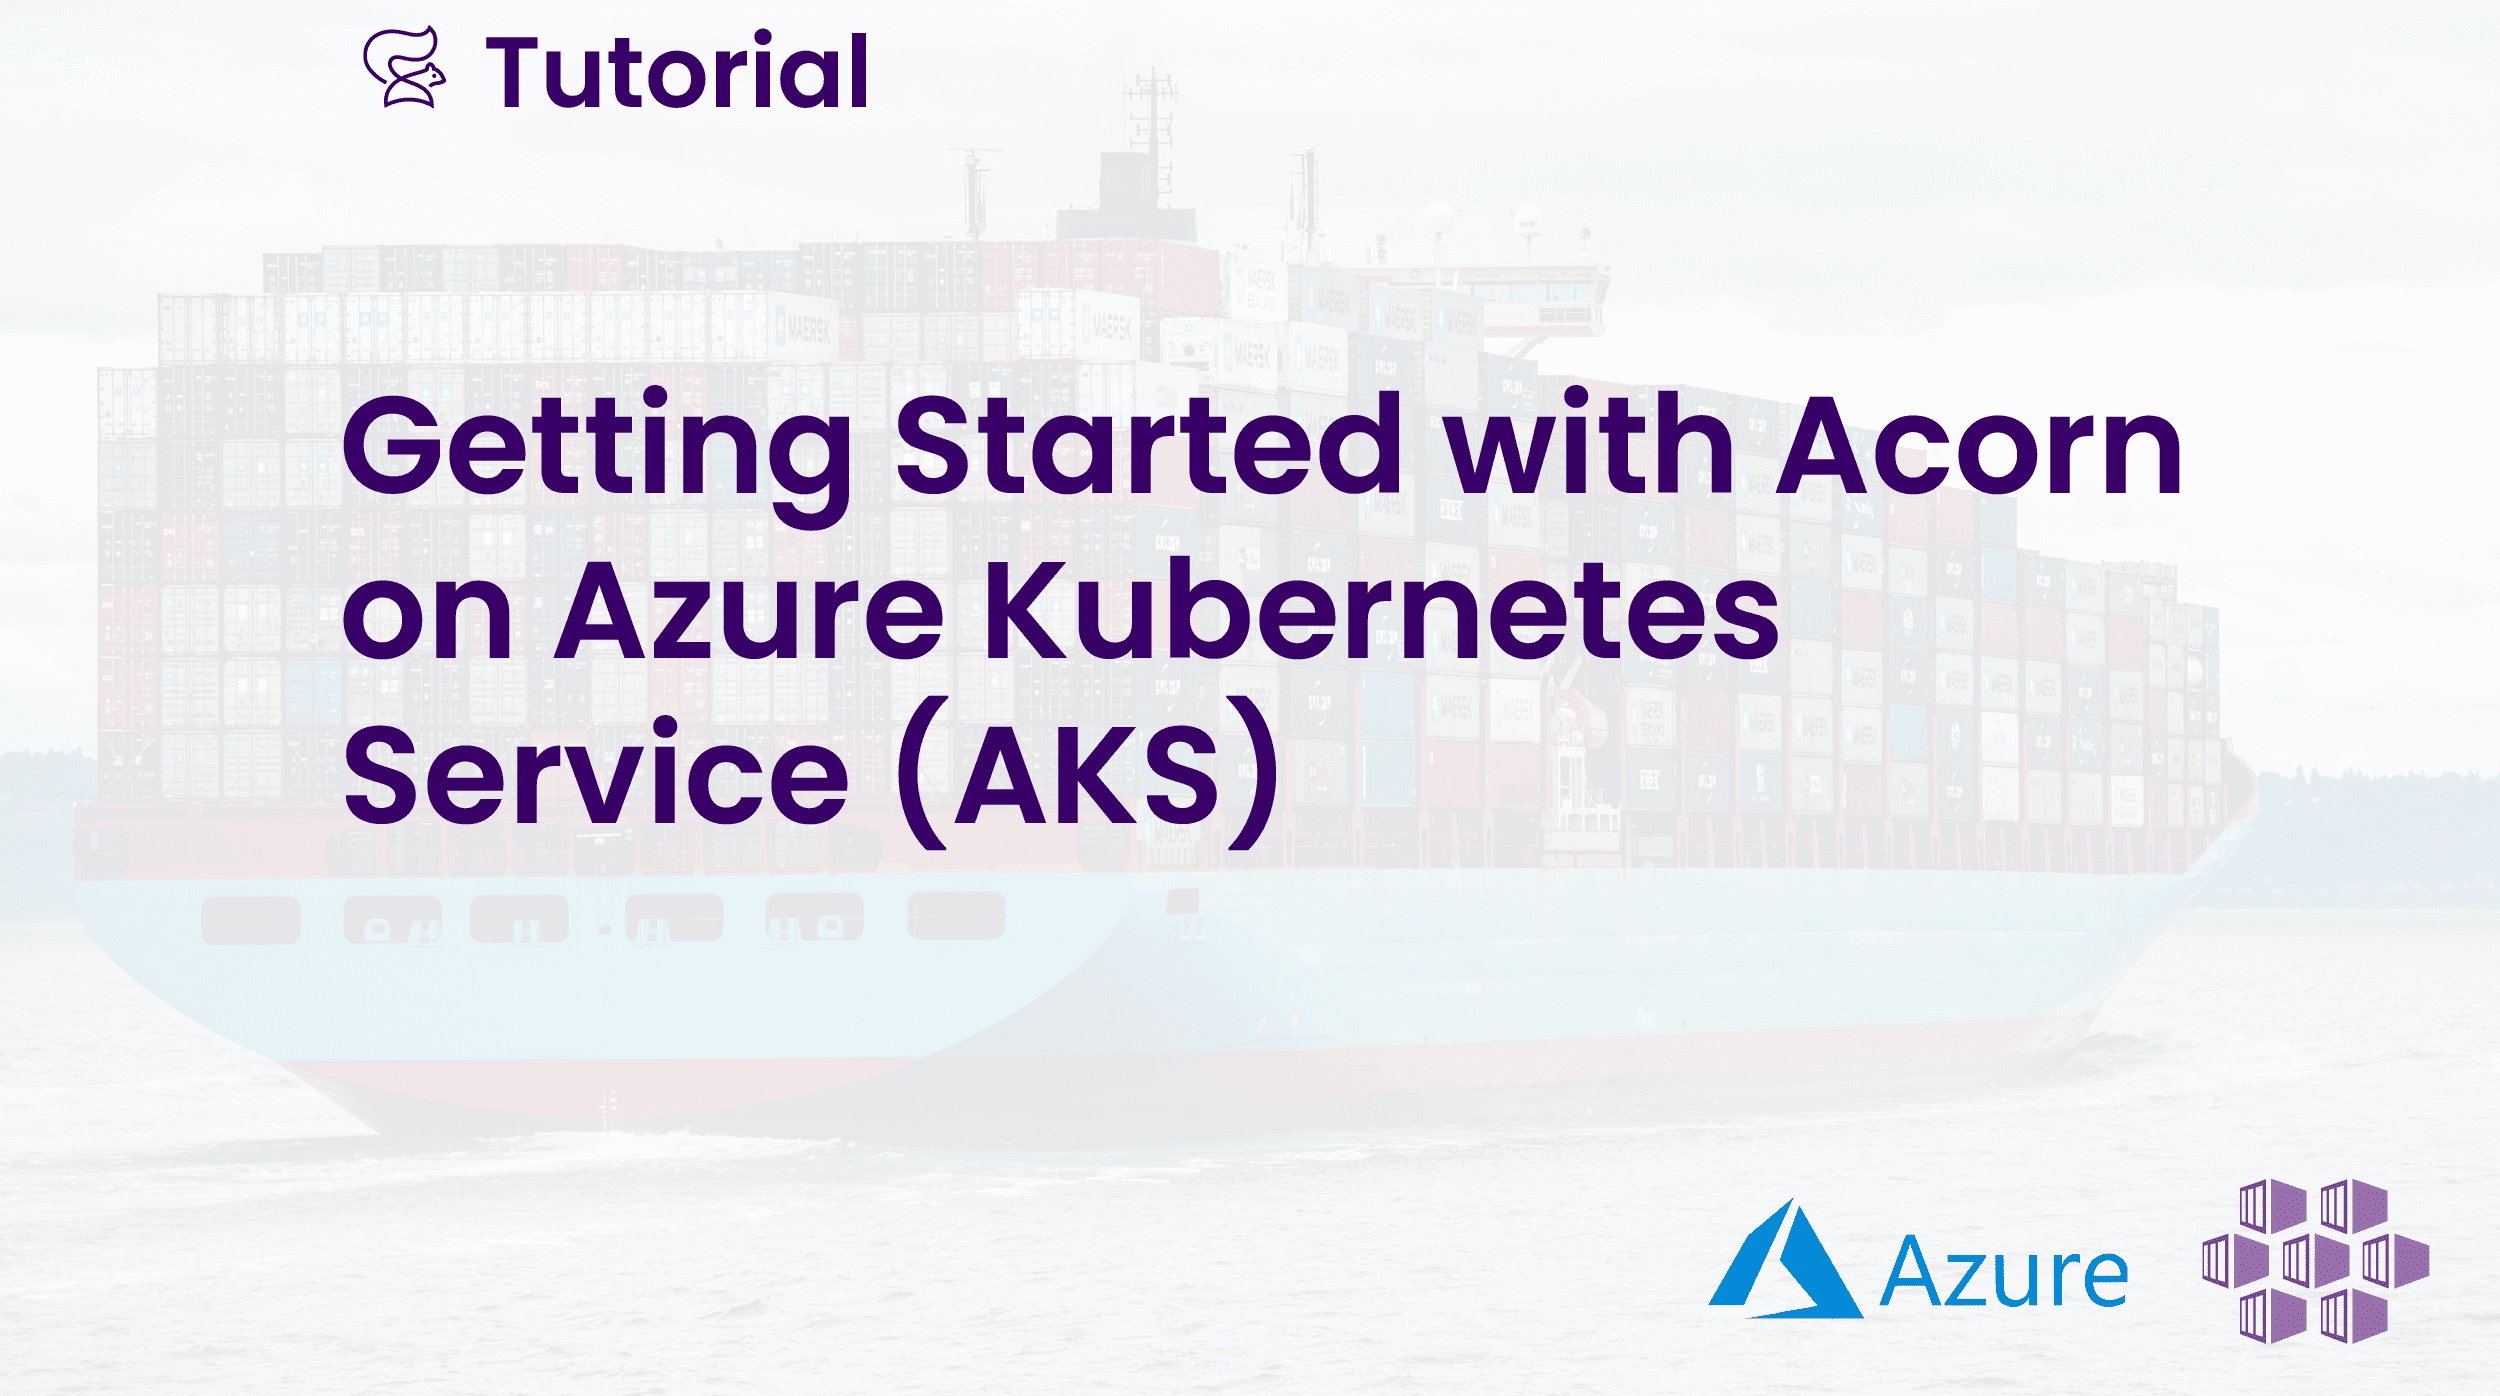 Getting Started with Acorn and Azure Kubernetes Service (AKS)